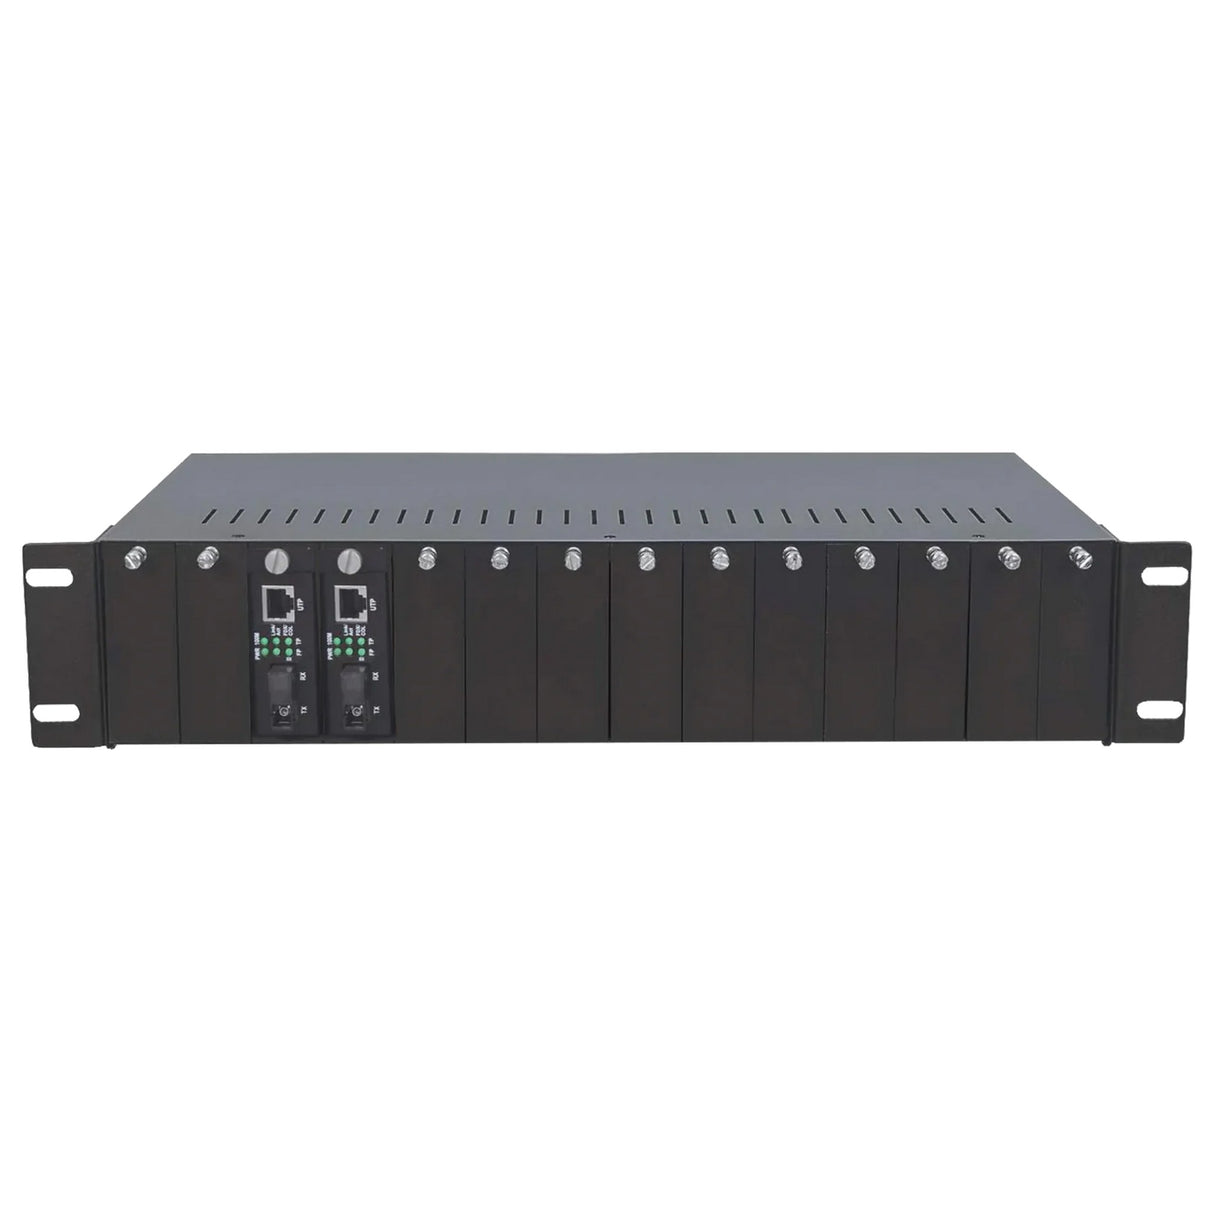 TechLogix Networx TL-RKMC-14 14 Slot Rack-Mount Media Converter Chassis with Two Integrated Power Supplies